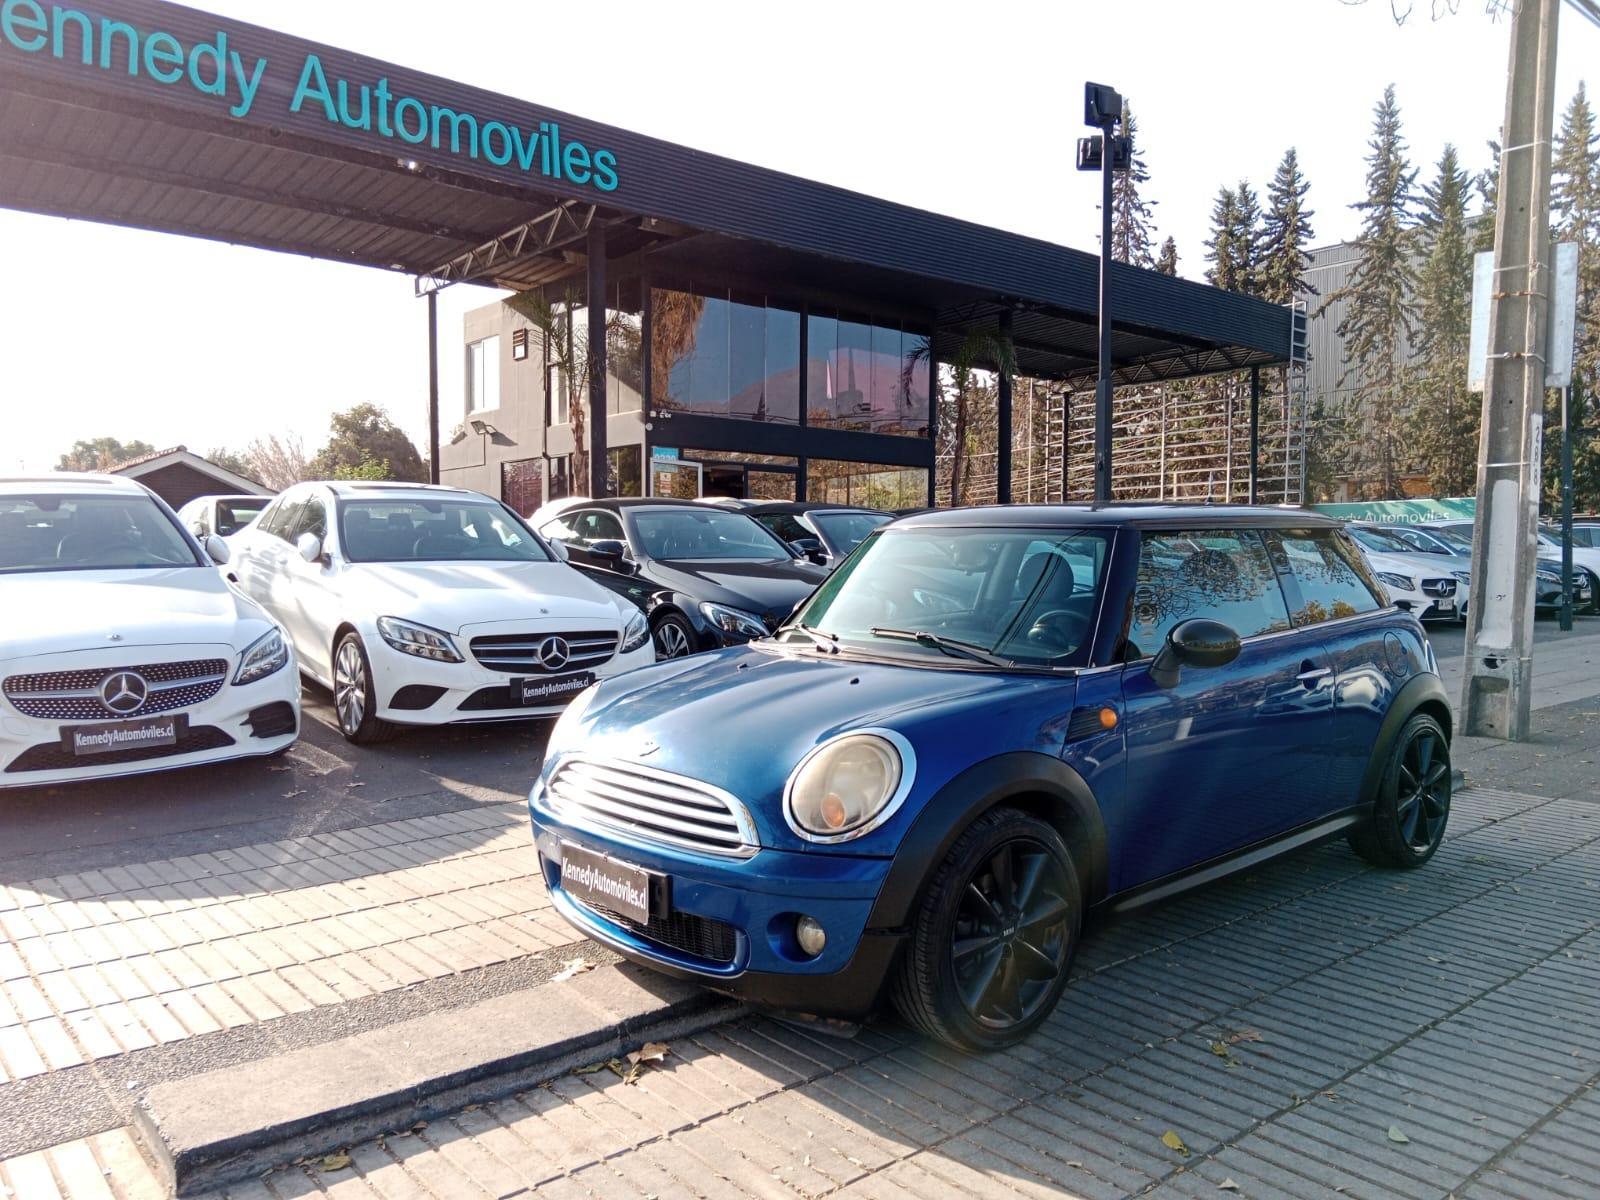 MINI COOPER 1.6 look John Cooper 2008 Impecable - KENNEDY AUTOMOVILES